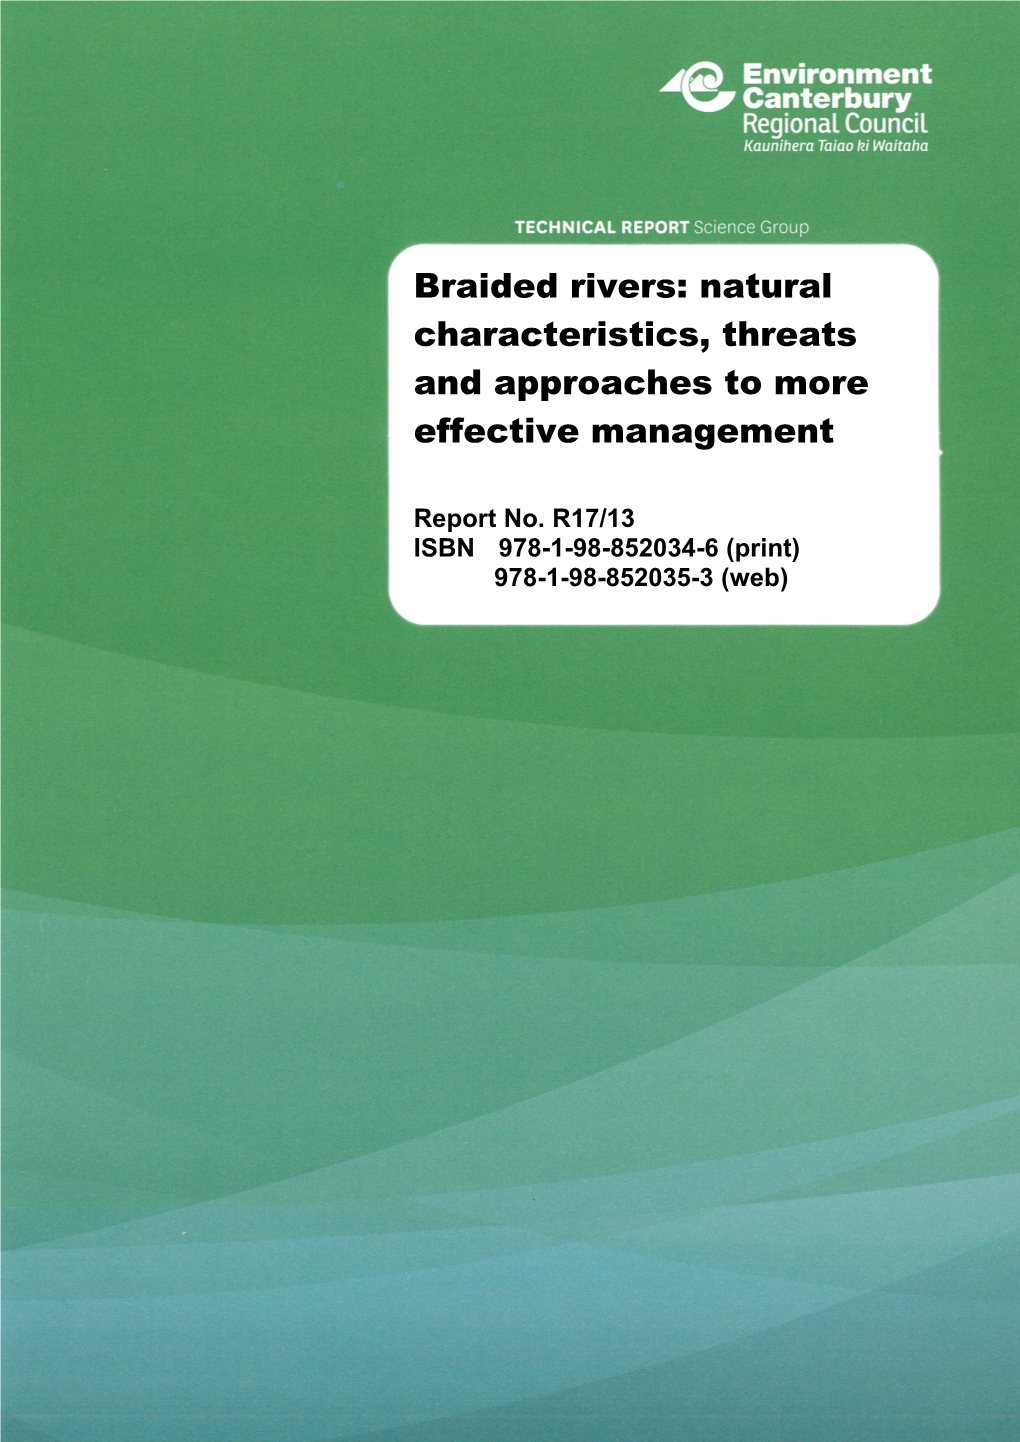 Braided Rivers: Natural Characteristics, Threats and Approaches to More Effective Management